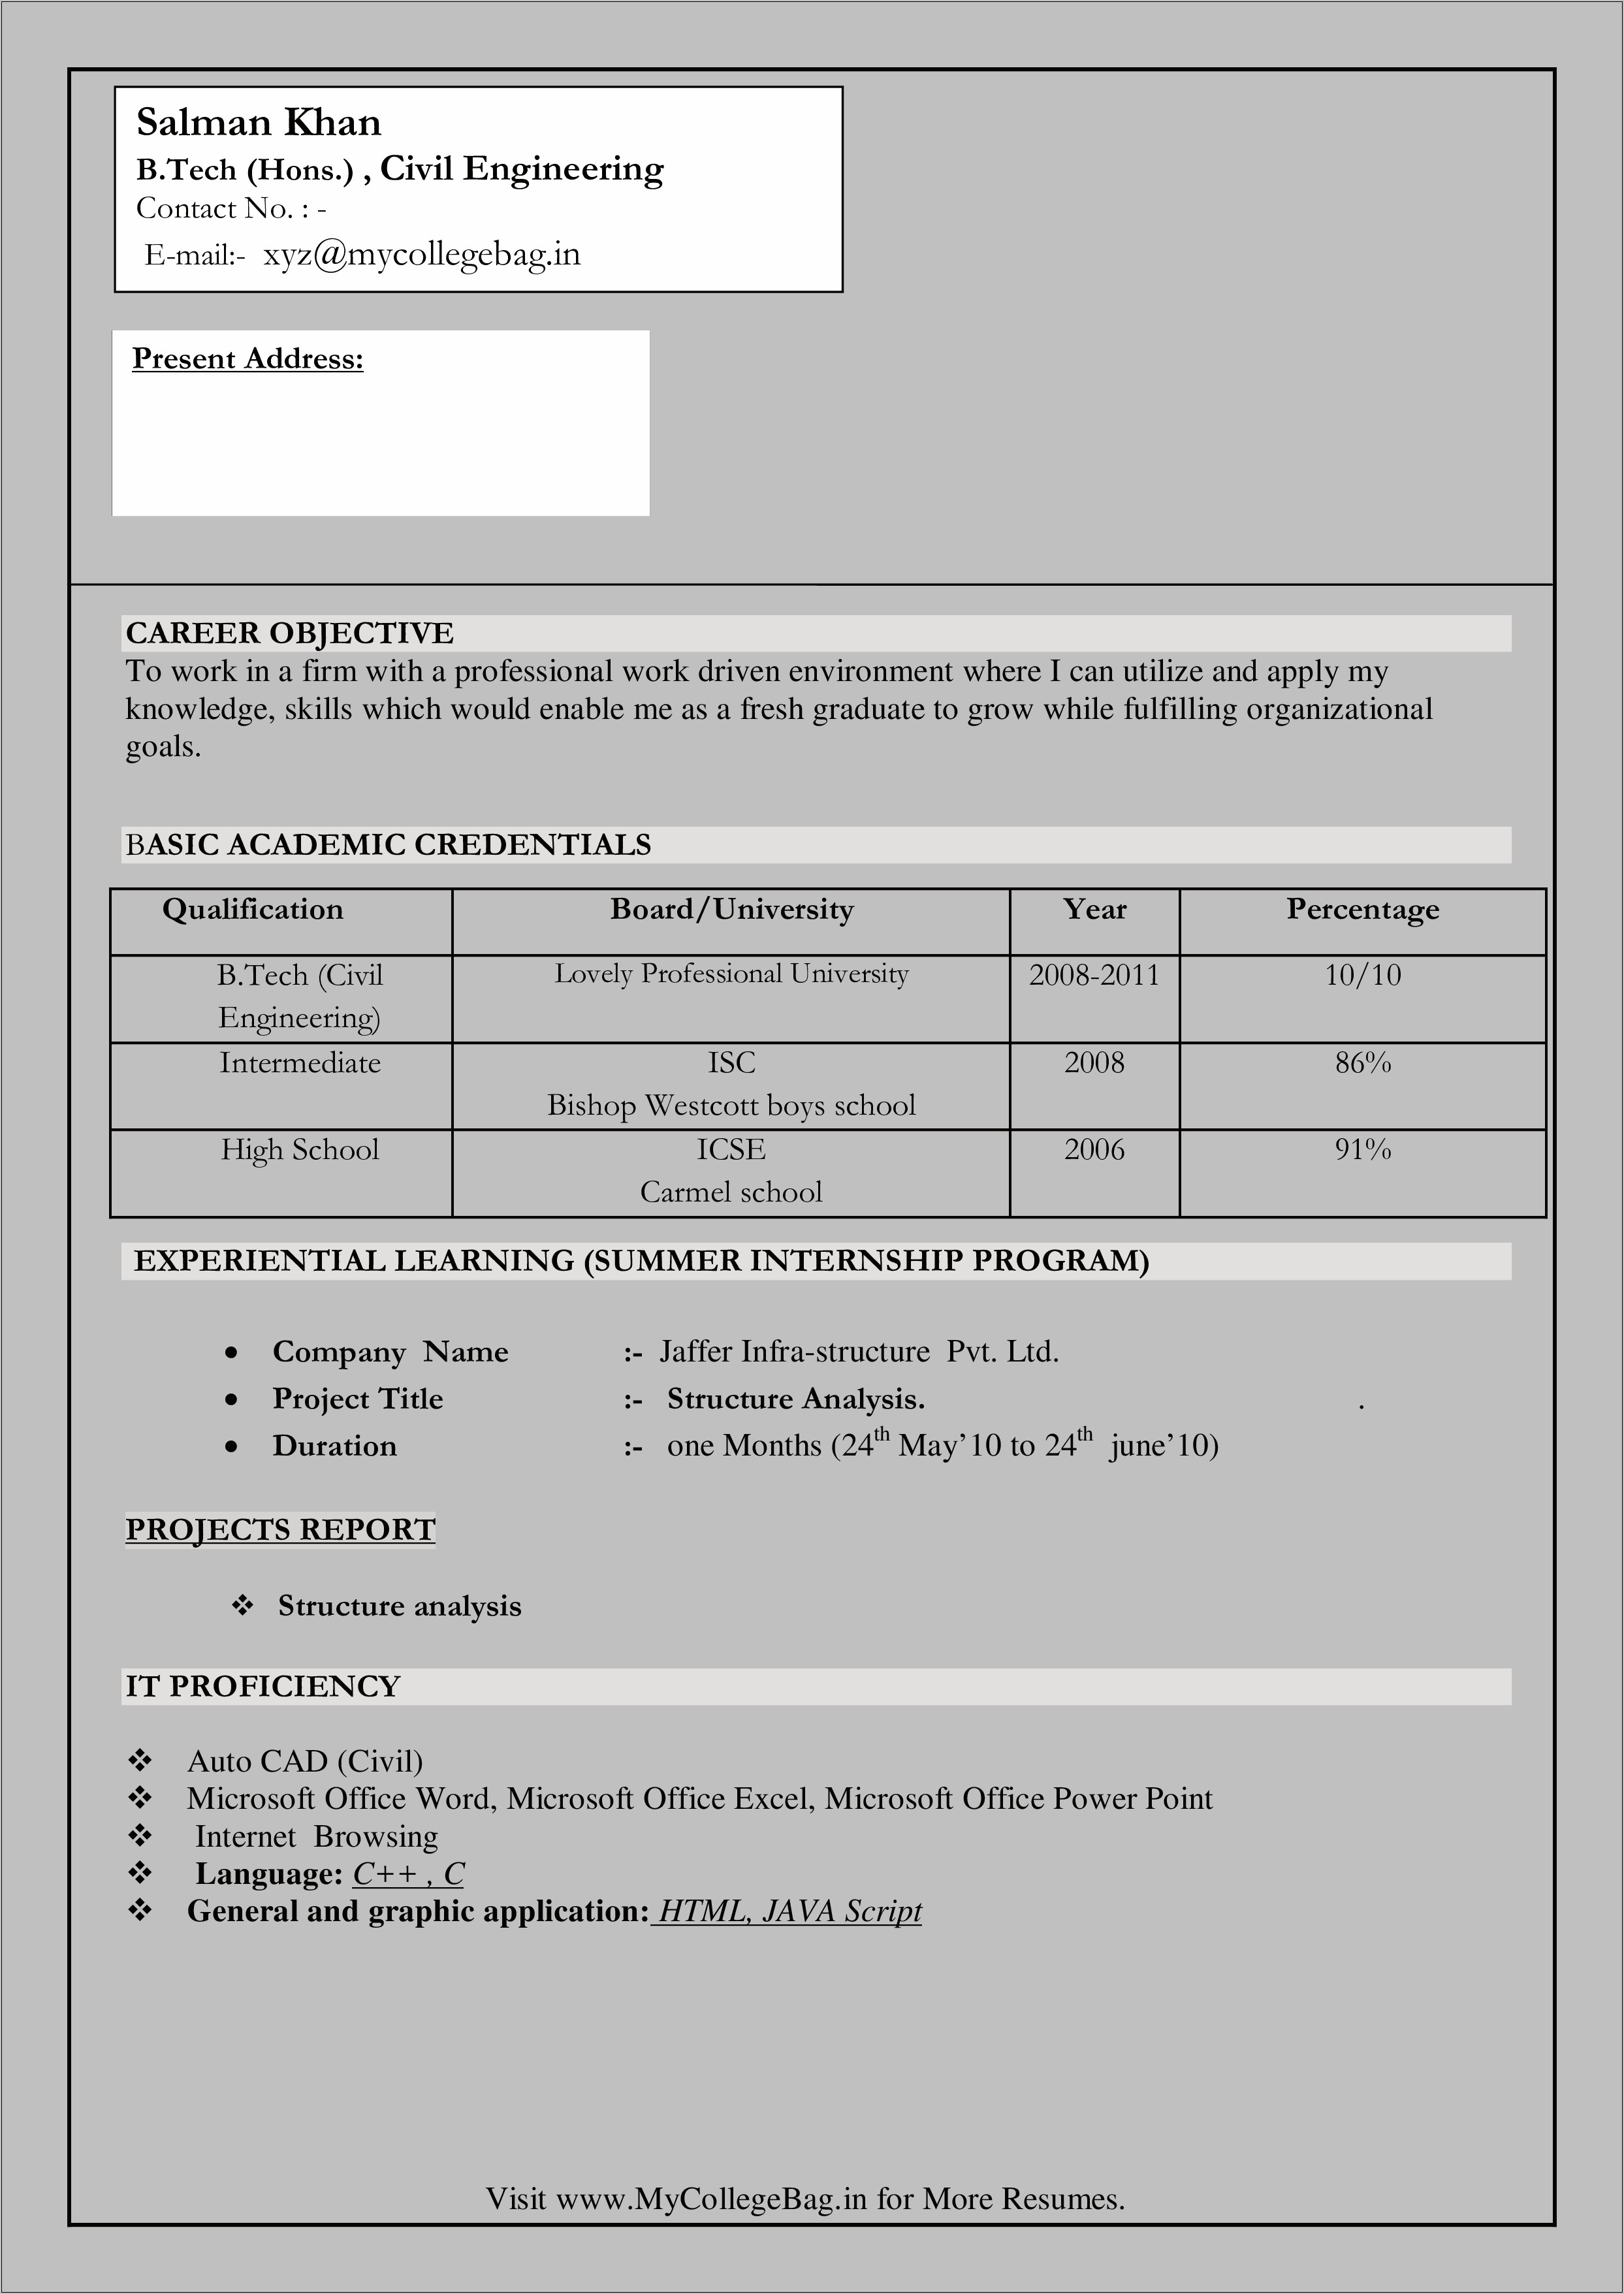 resume-format-download-for-freshers-in-word-resume-example-gallery